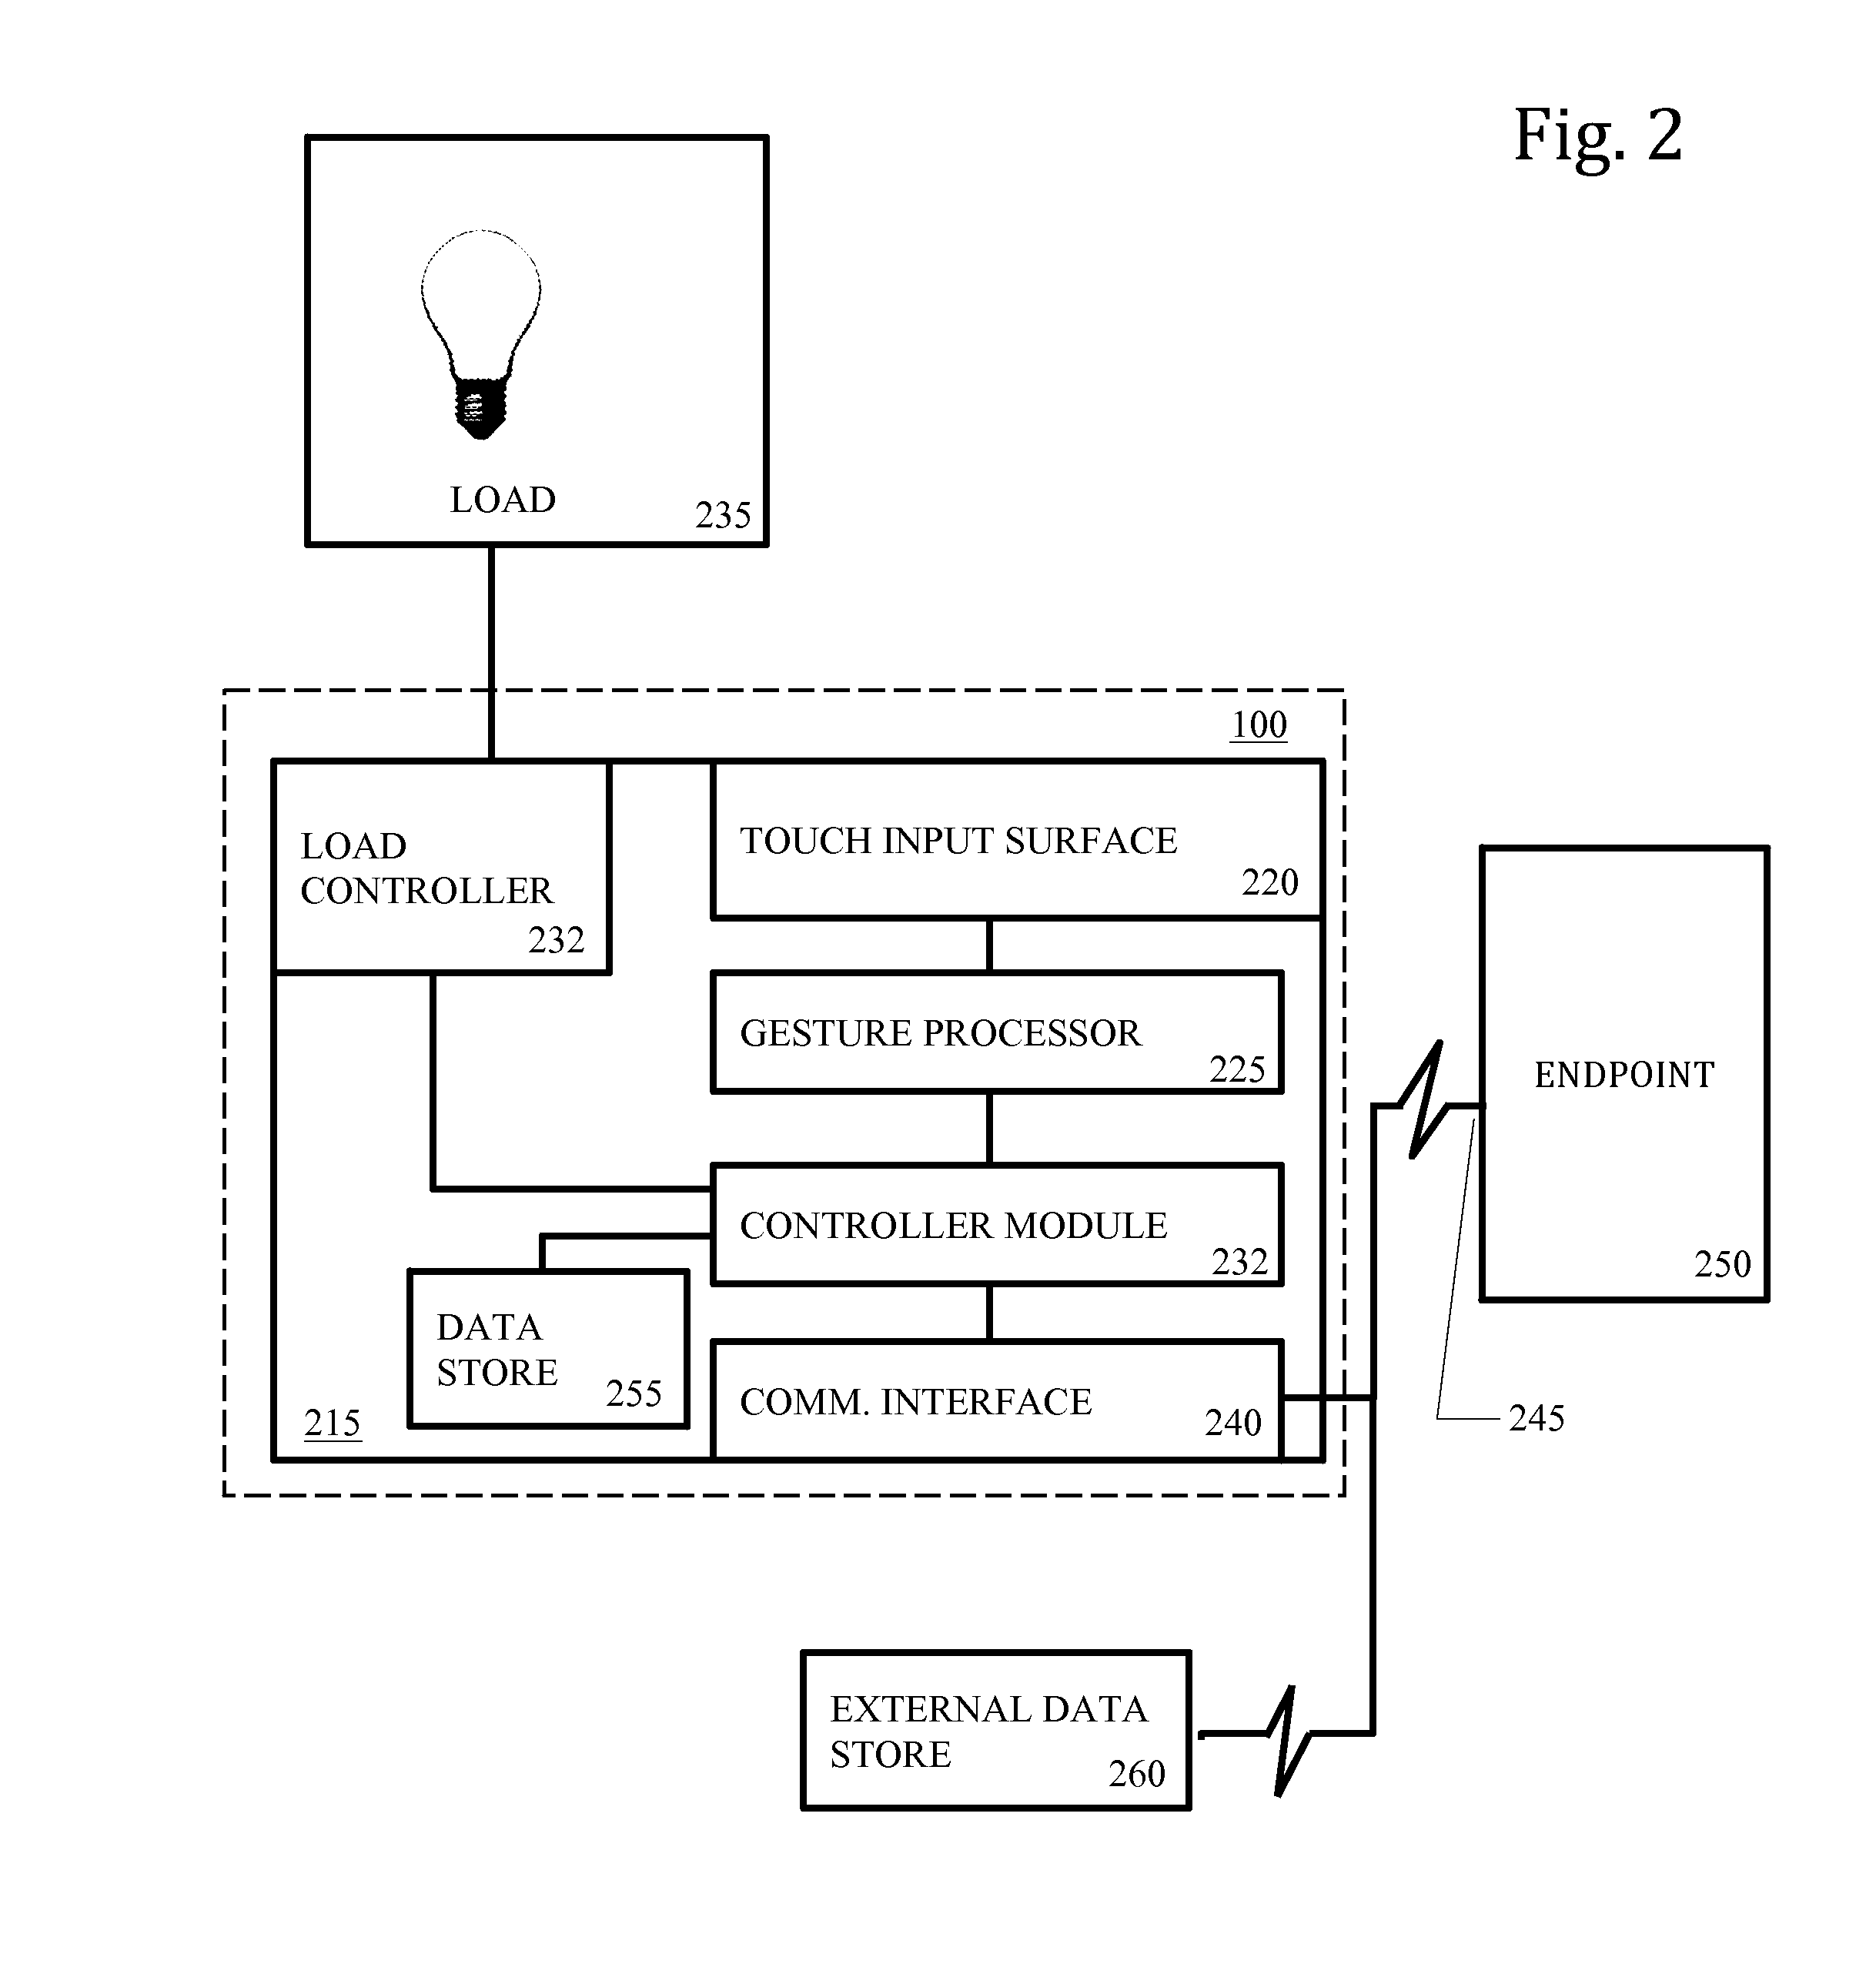 Wall-Mounted Multi-Touch Electronic Lighting- Control Device with Capability to Control Additional Networked Devices